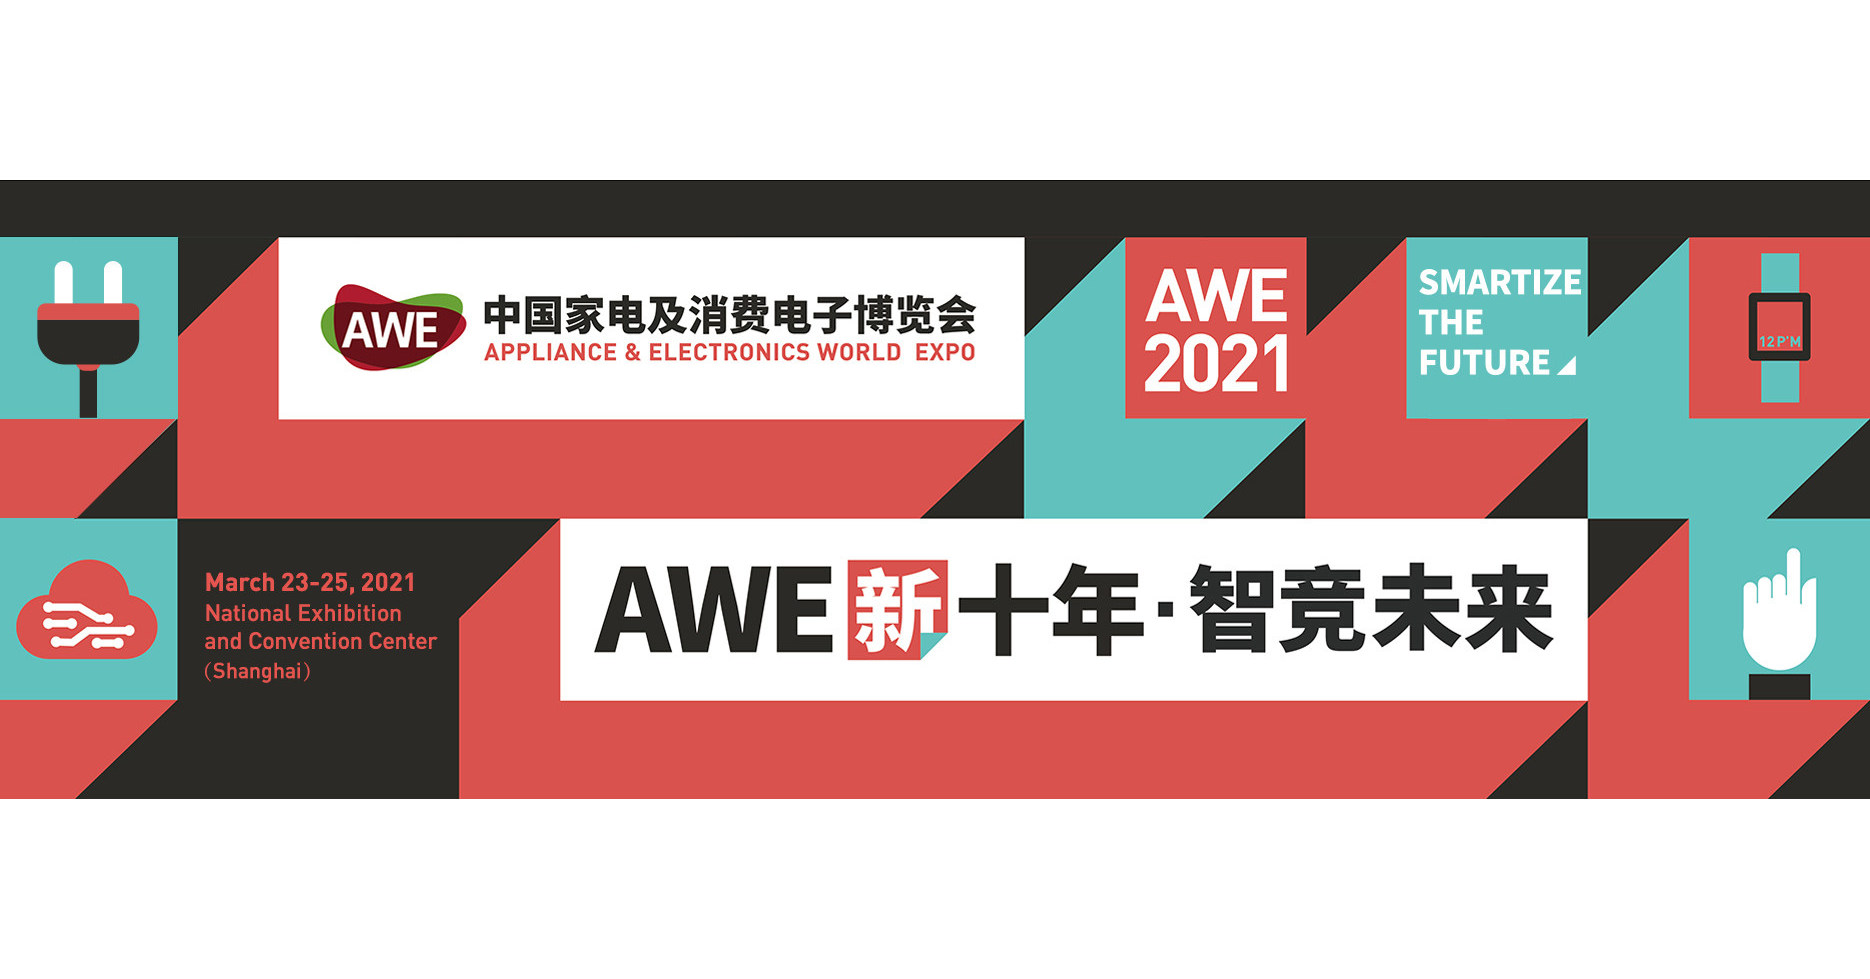 AWE2021 changes venue & dates to NECC (Shanghai) on March 2325 to